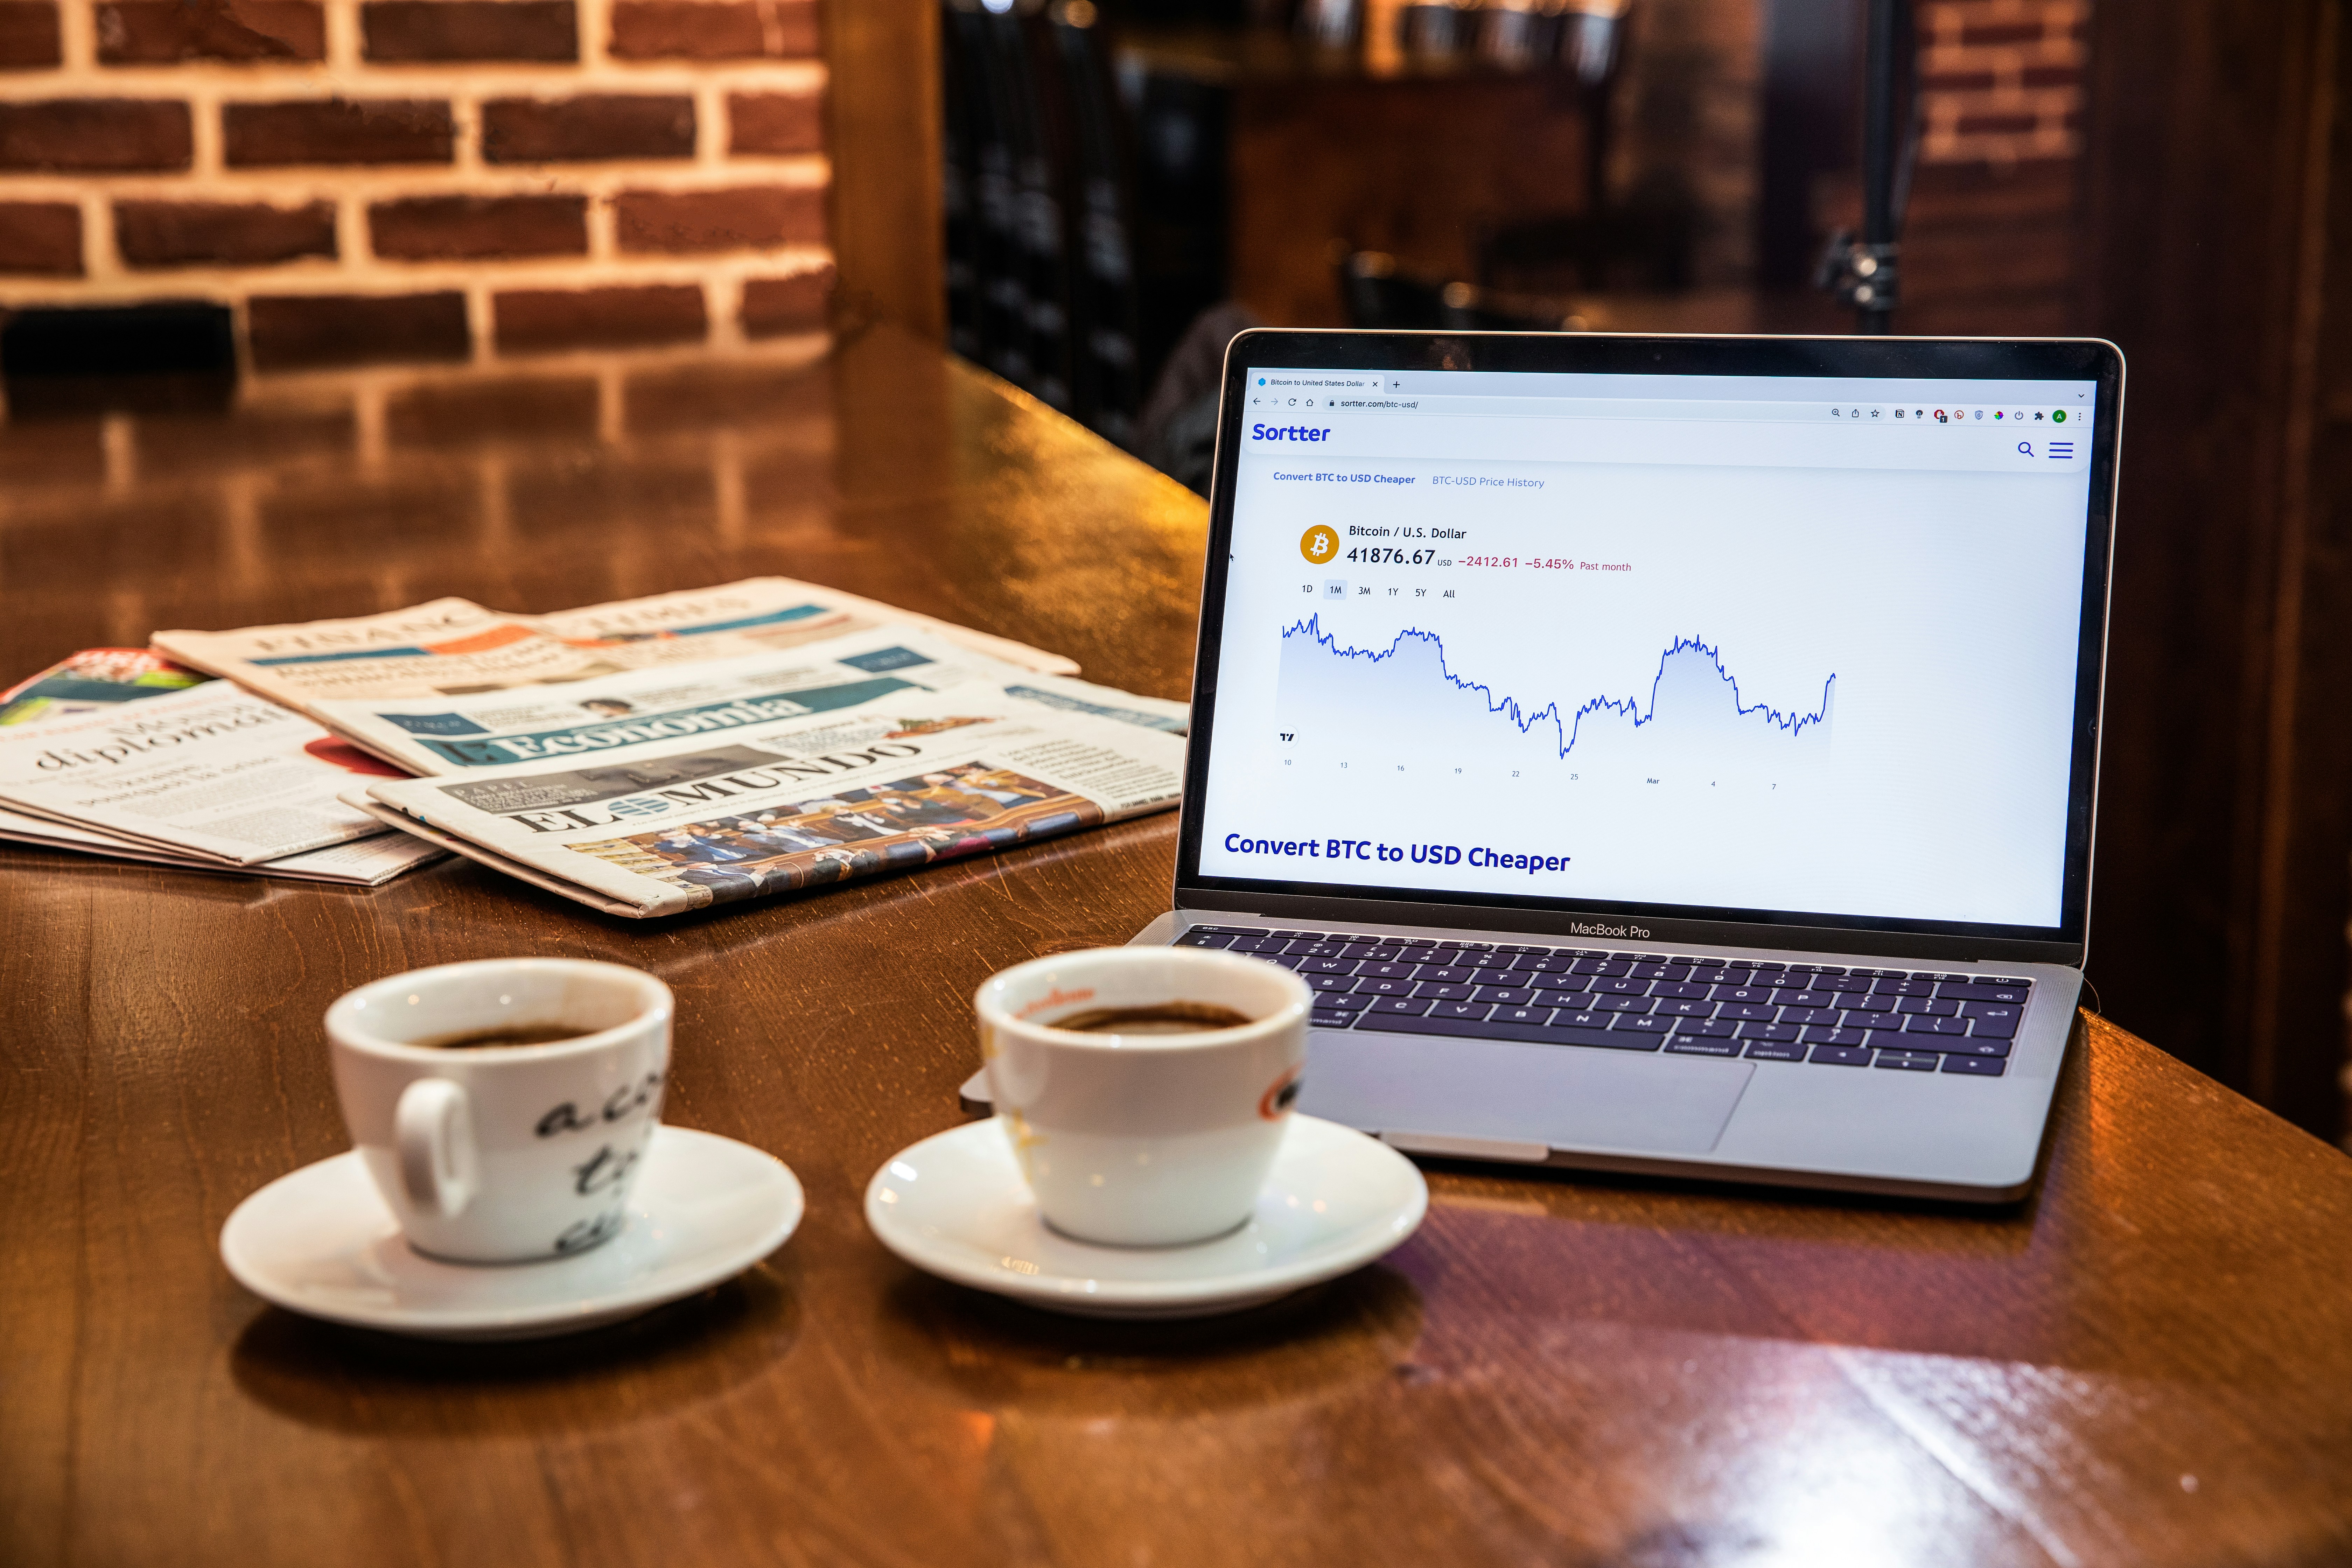 Coffee cups with Bitcoin chart and some newspapers in the background.